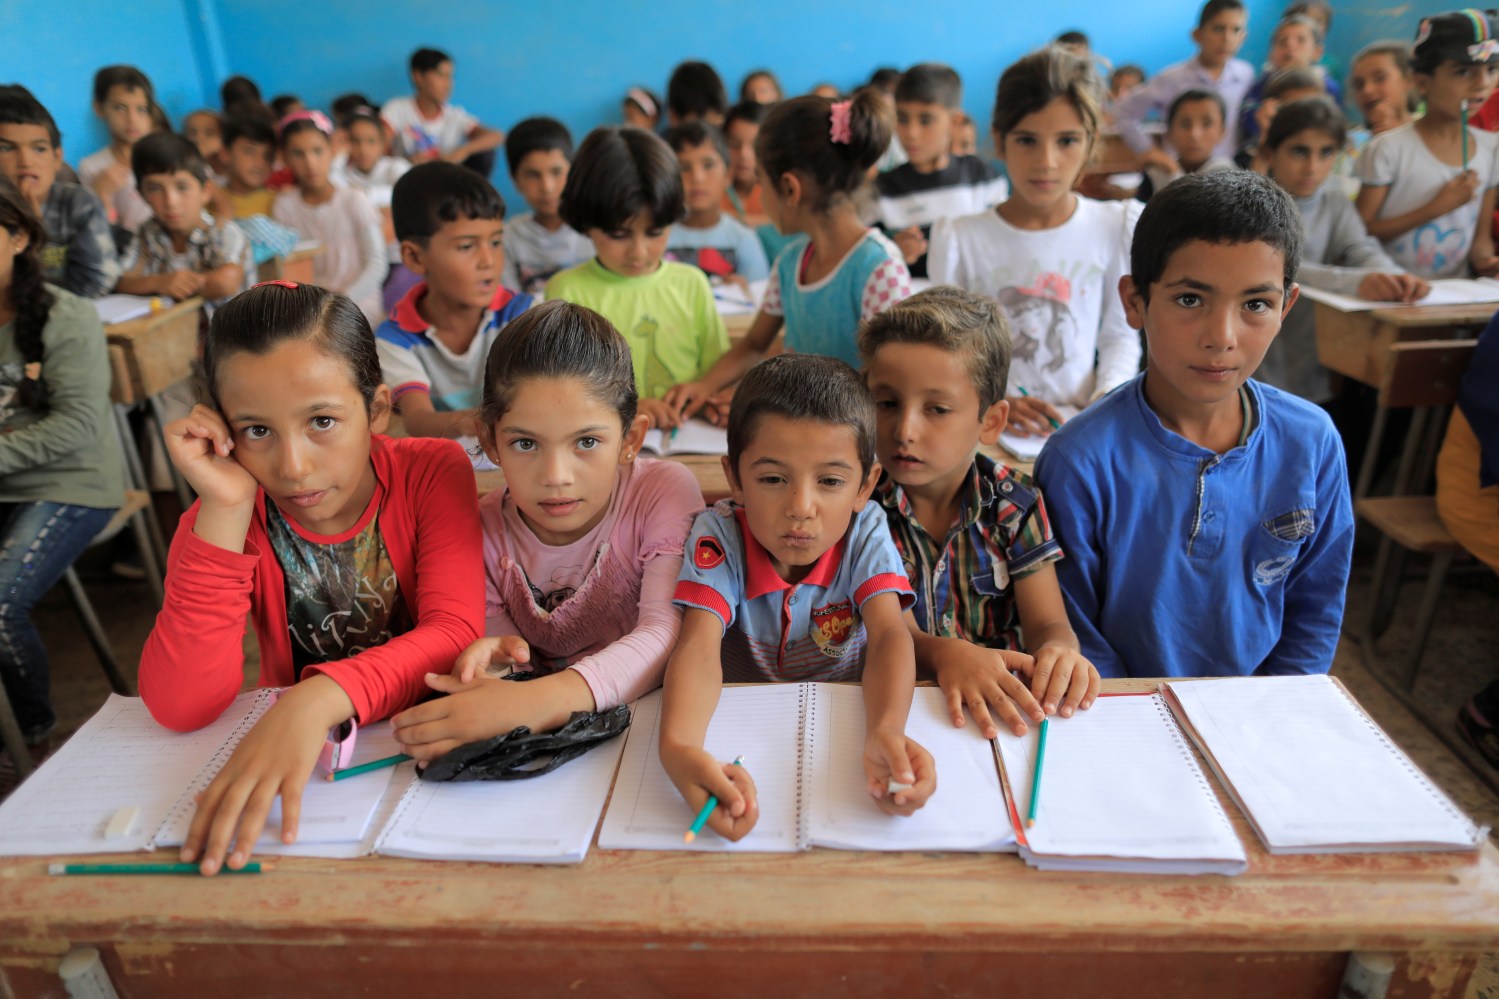 Children attend their first class immediately after they got registered at the school in Hazema North Raqqa, Syria August 21, 2017. Picture taken August 21, 2017. REUTERS/Zohra Bensemra - RC14C09853B0